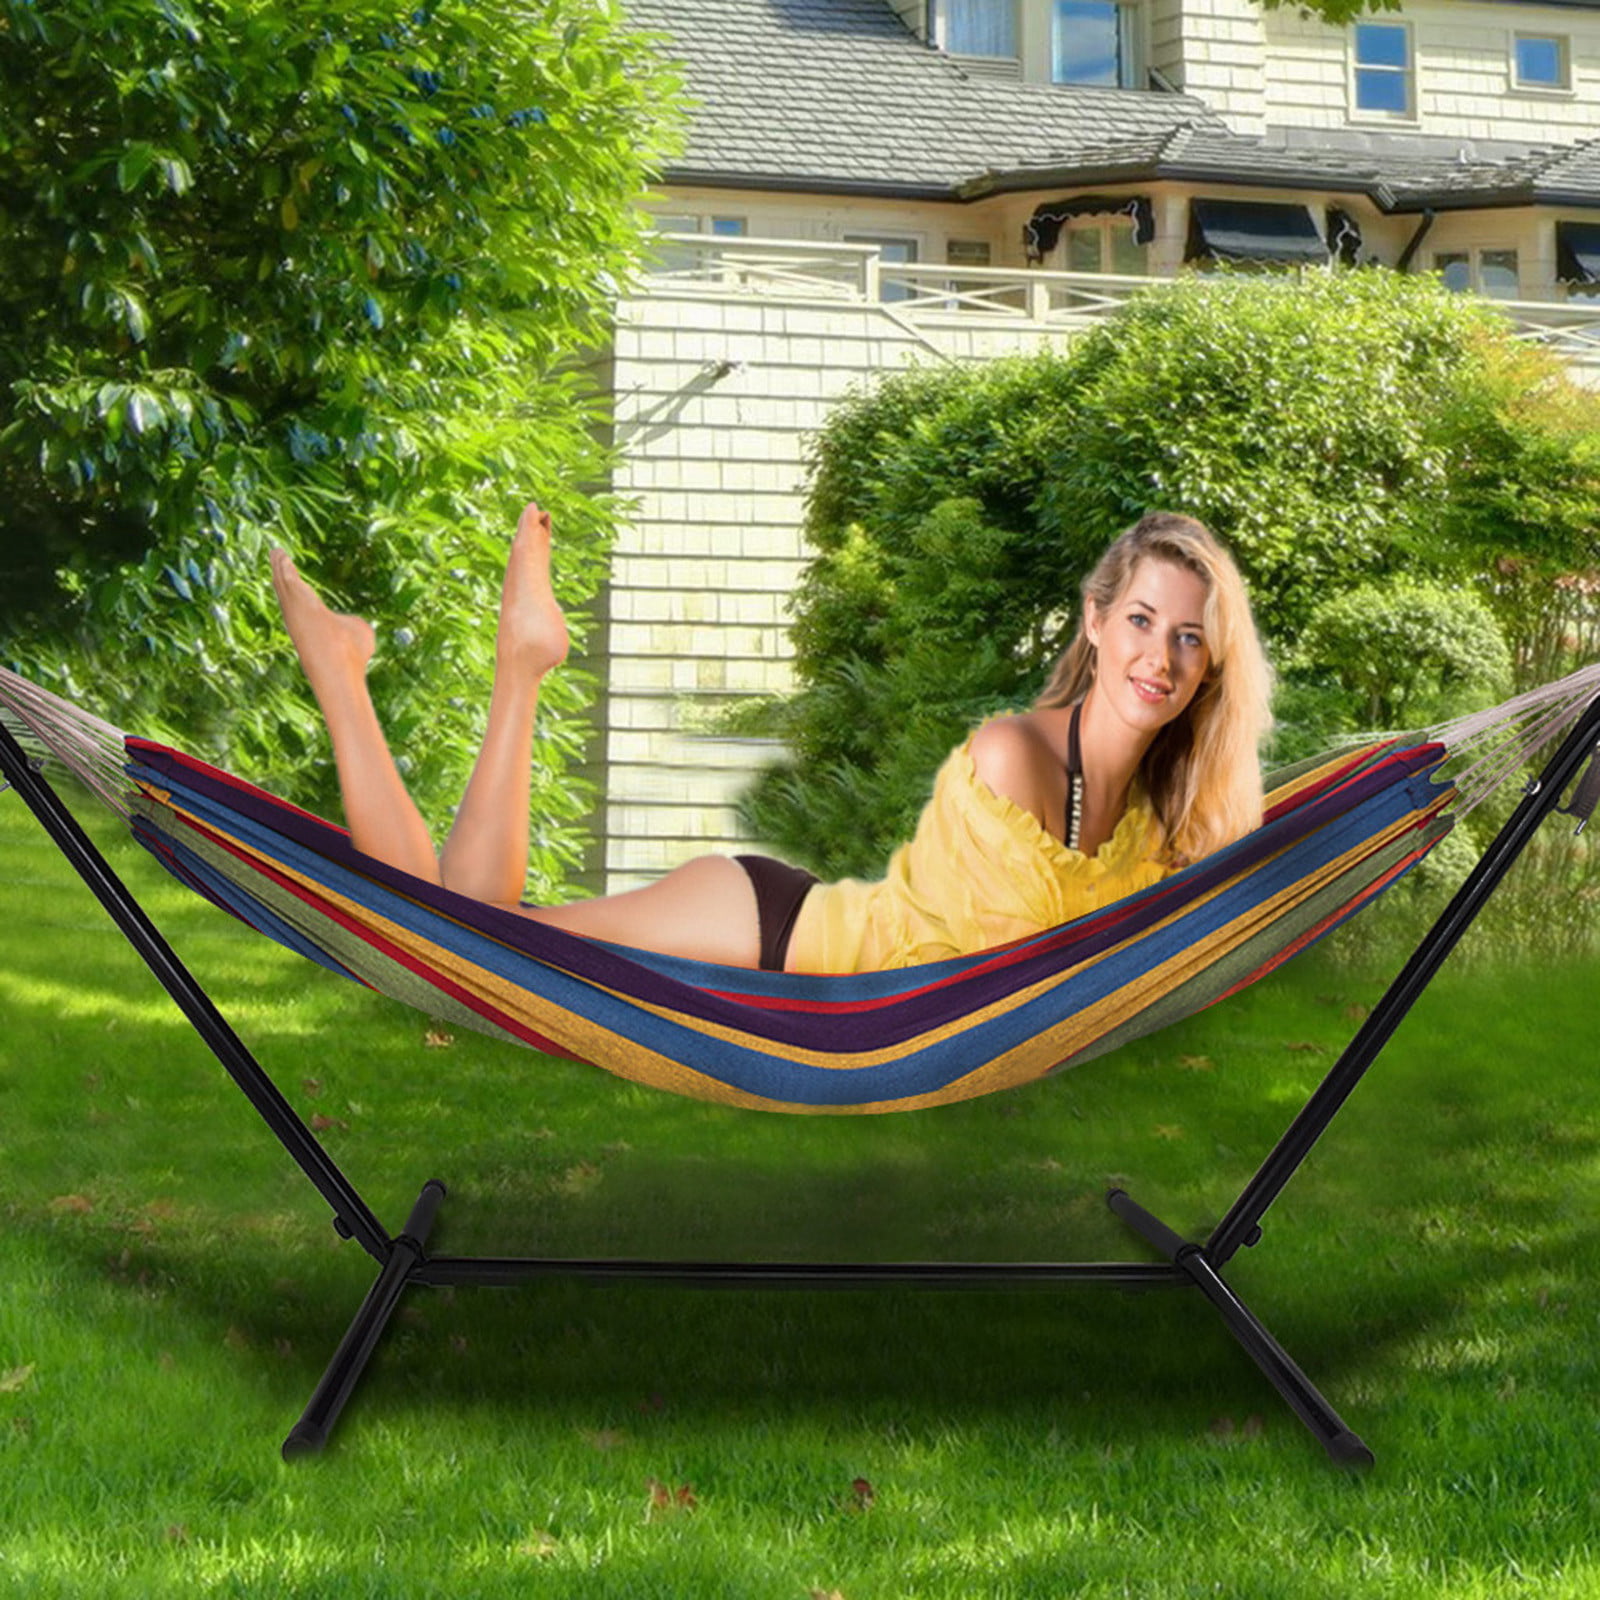 Details about   Portable Hammock Folding Steel Frame Home Outdoor Patio Garden Travel Use 1 PC 